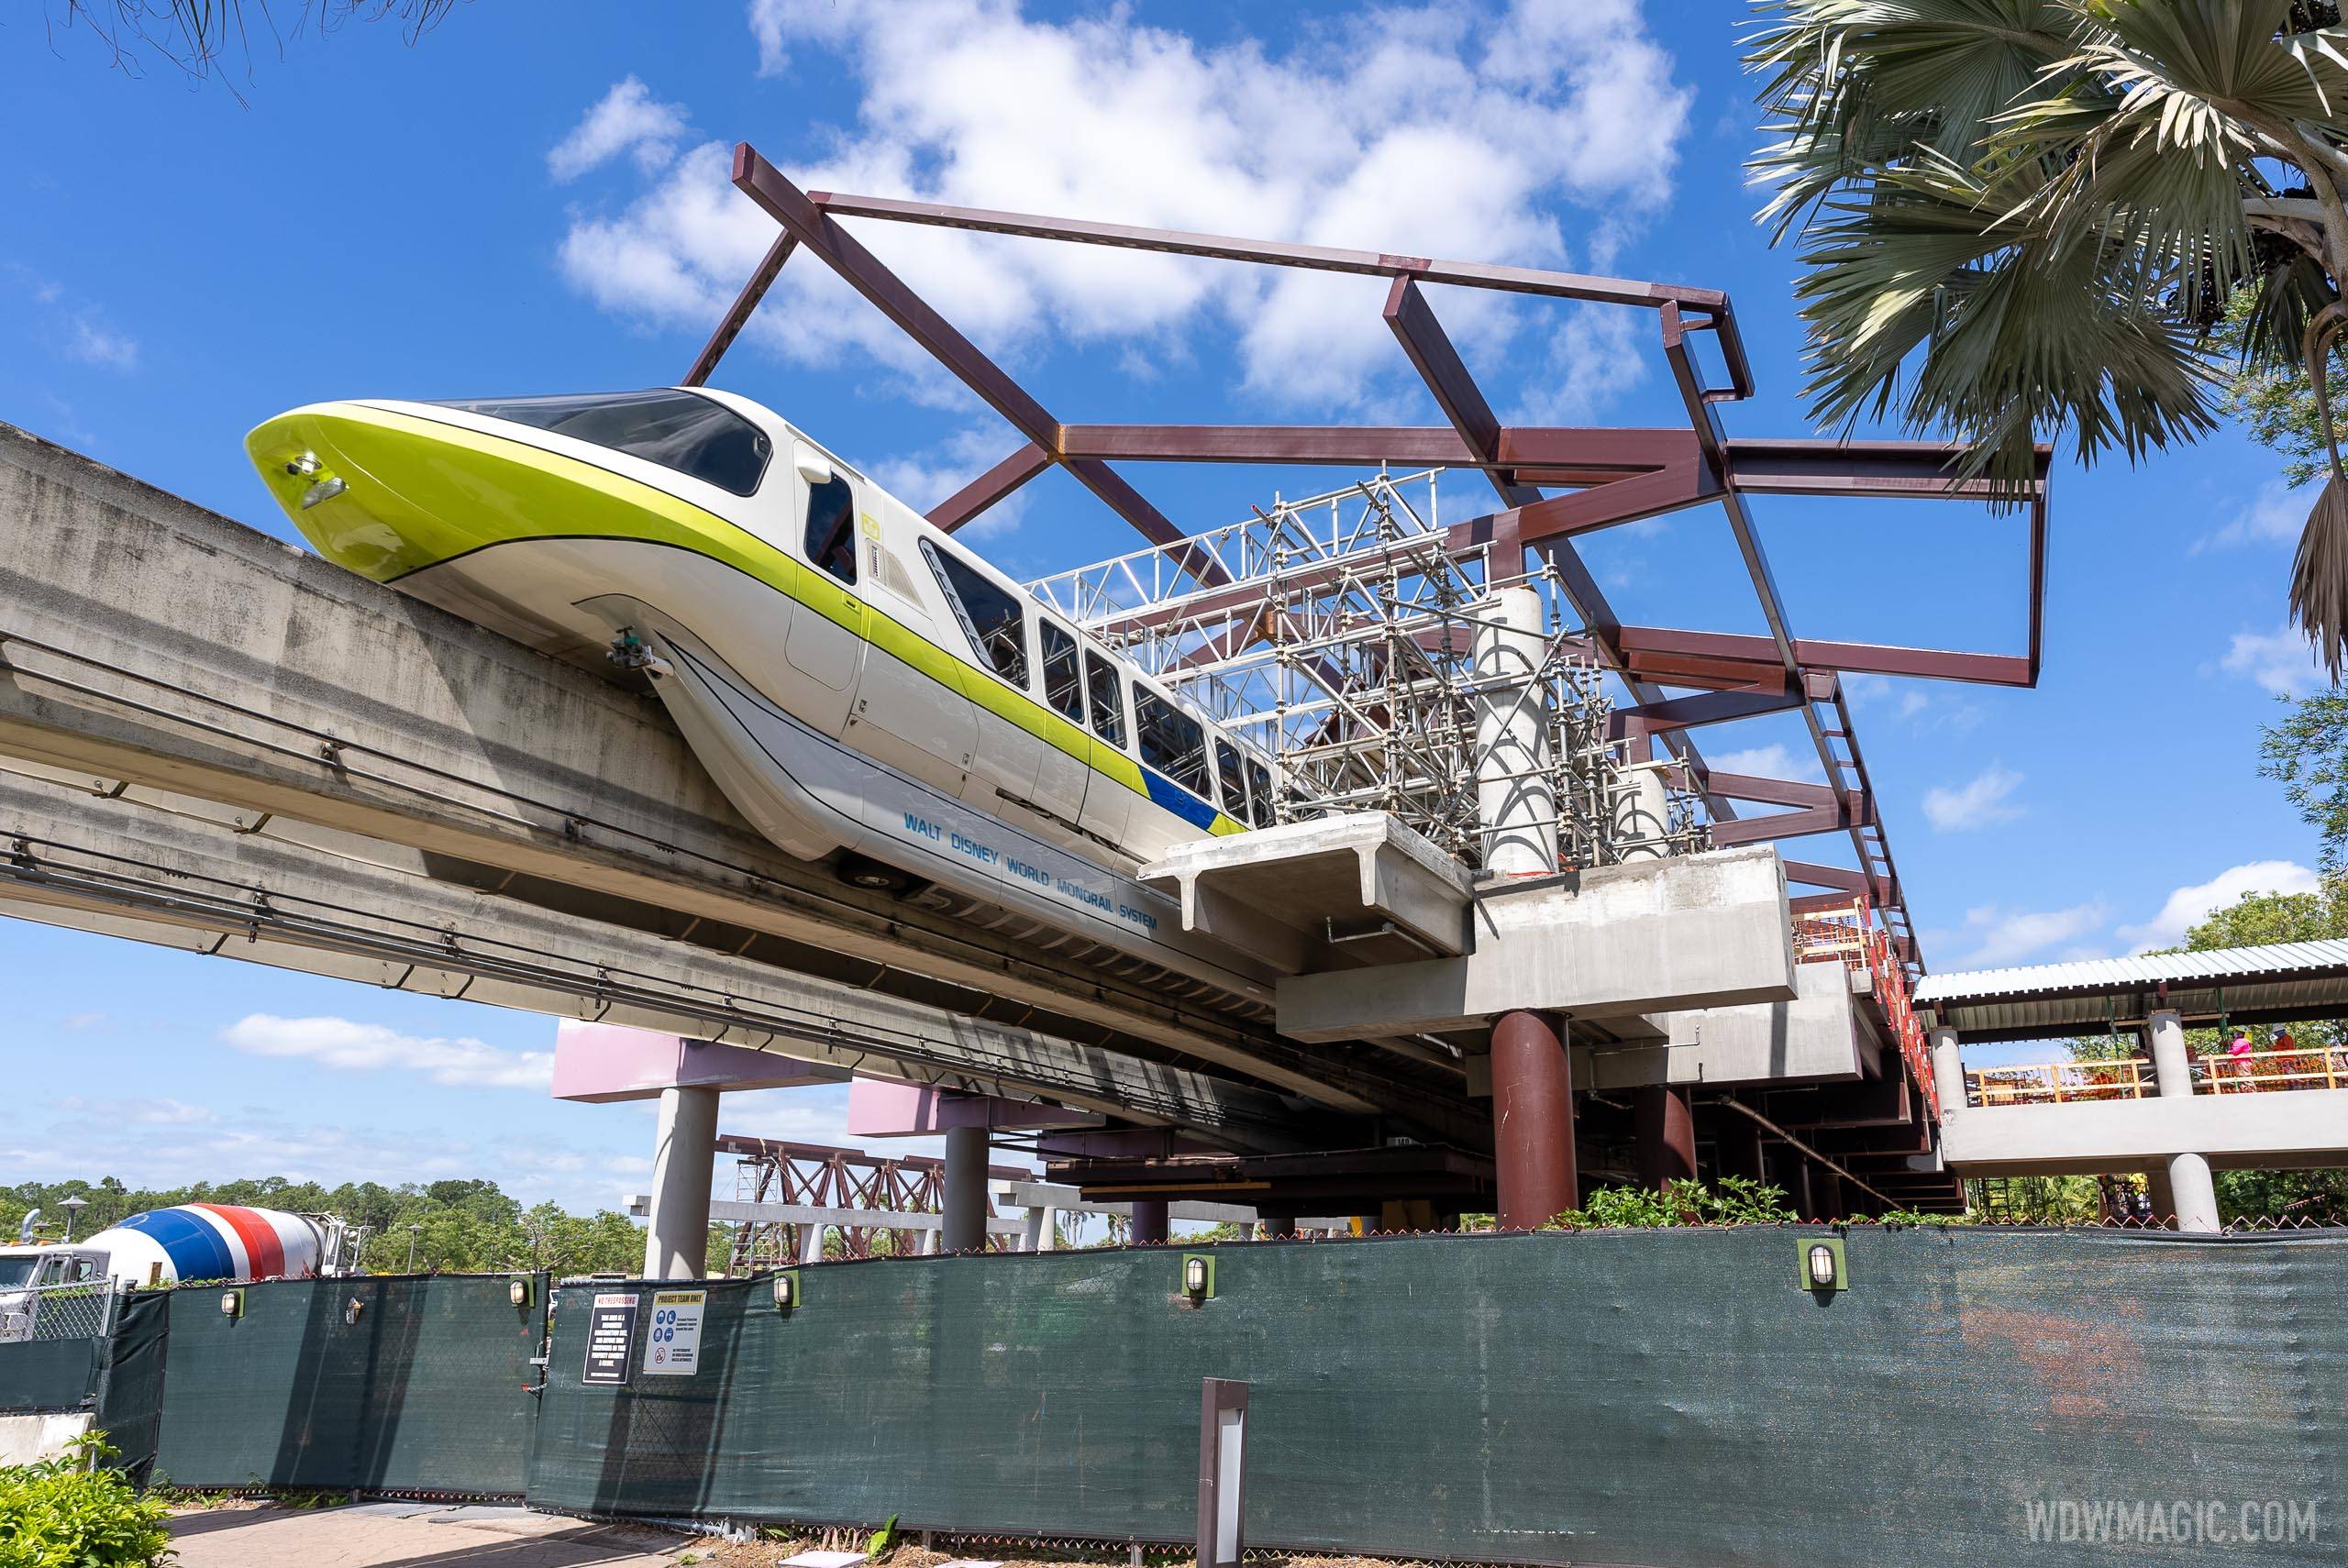 Monorail enters the still under construction monorail station